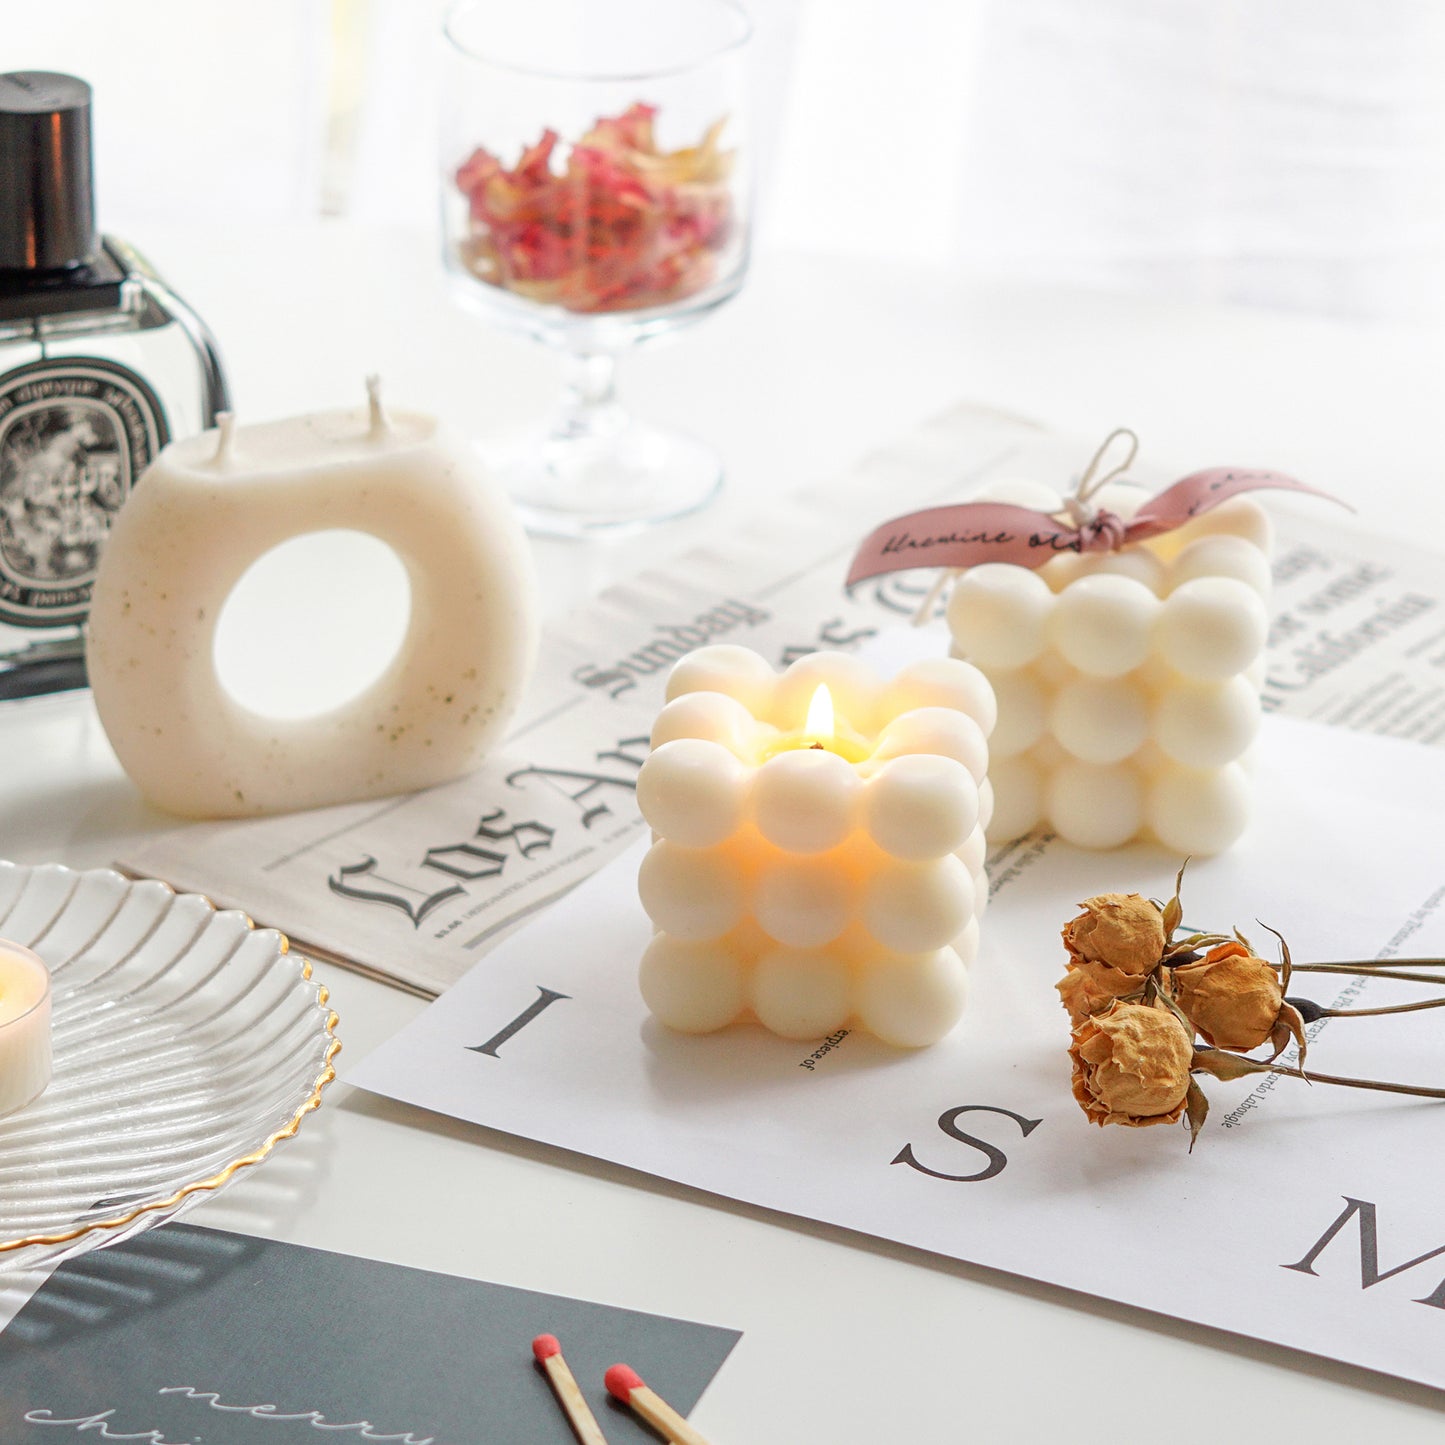 a lit white cube shape bubble soy pillar candle, dried flowers, postcards, newspaper, perfume on white table